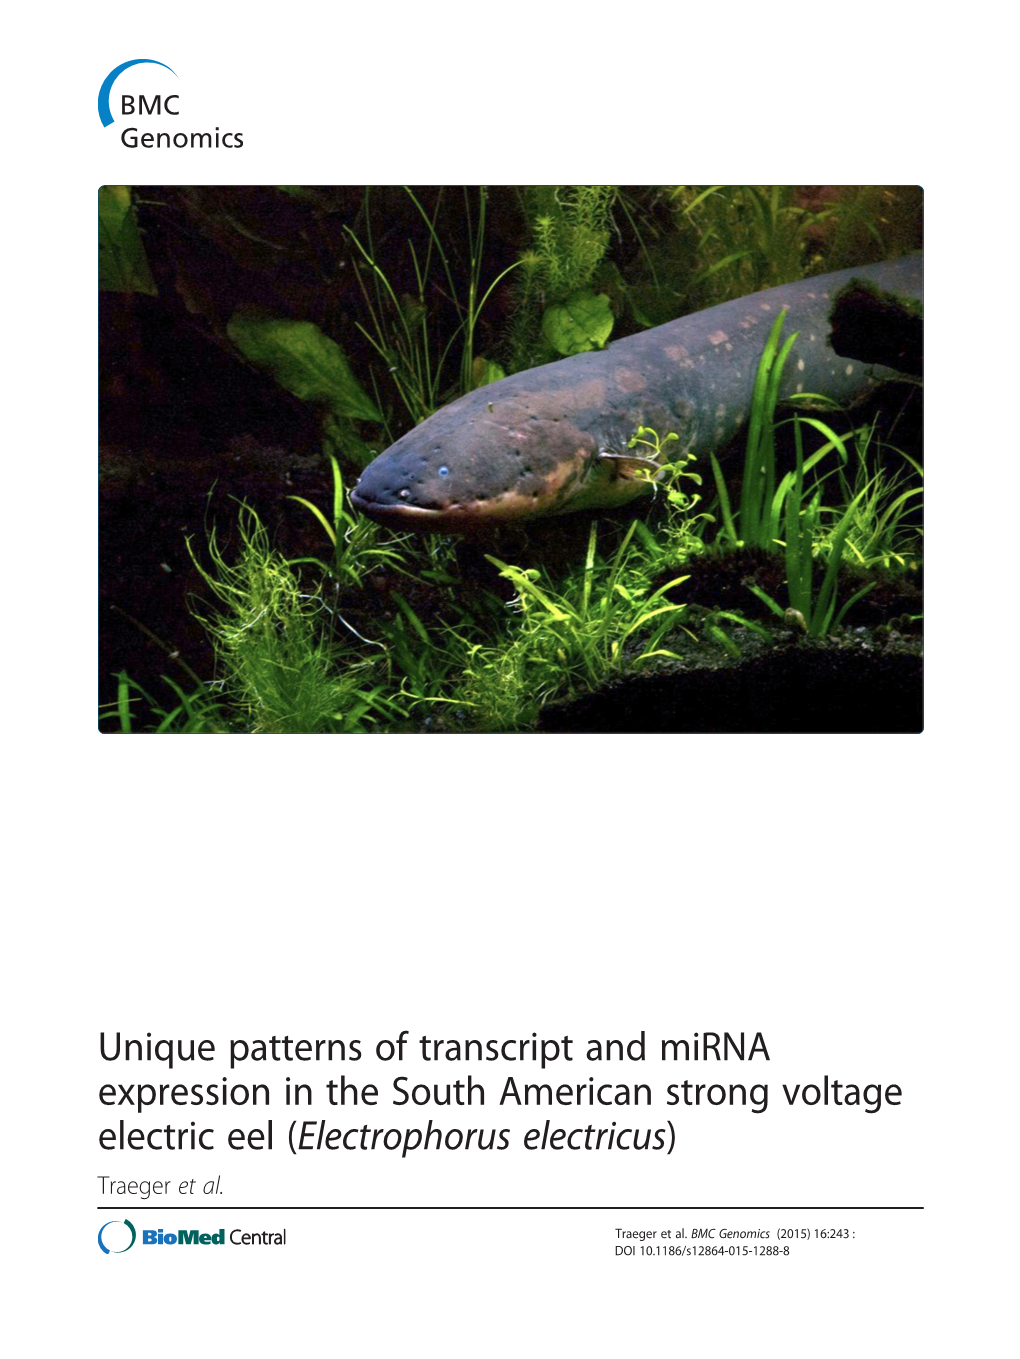 Unique Patterns of Transcript and Mirna Expression in the South American Strong Voltage Electric Eel (Electrophorus Electricus) Traeger Et Al